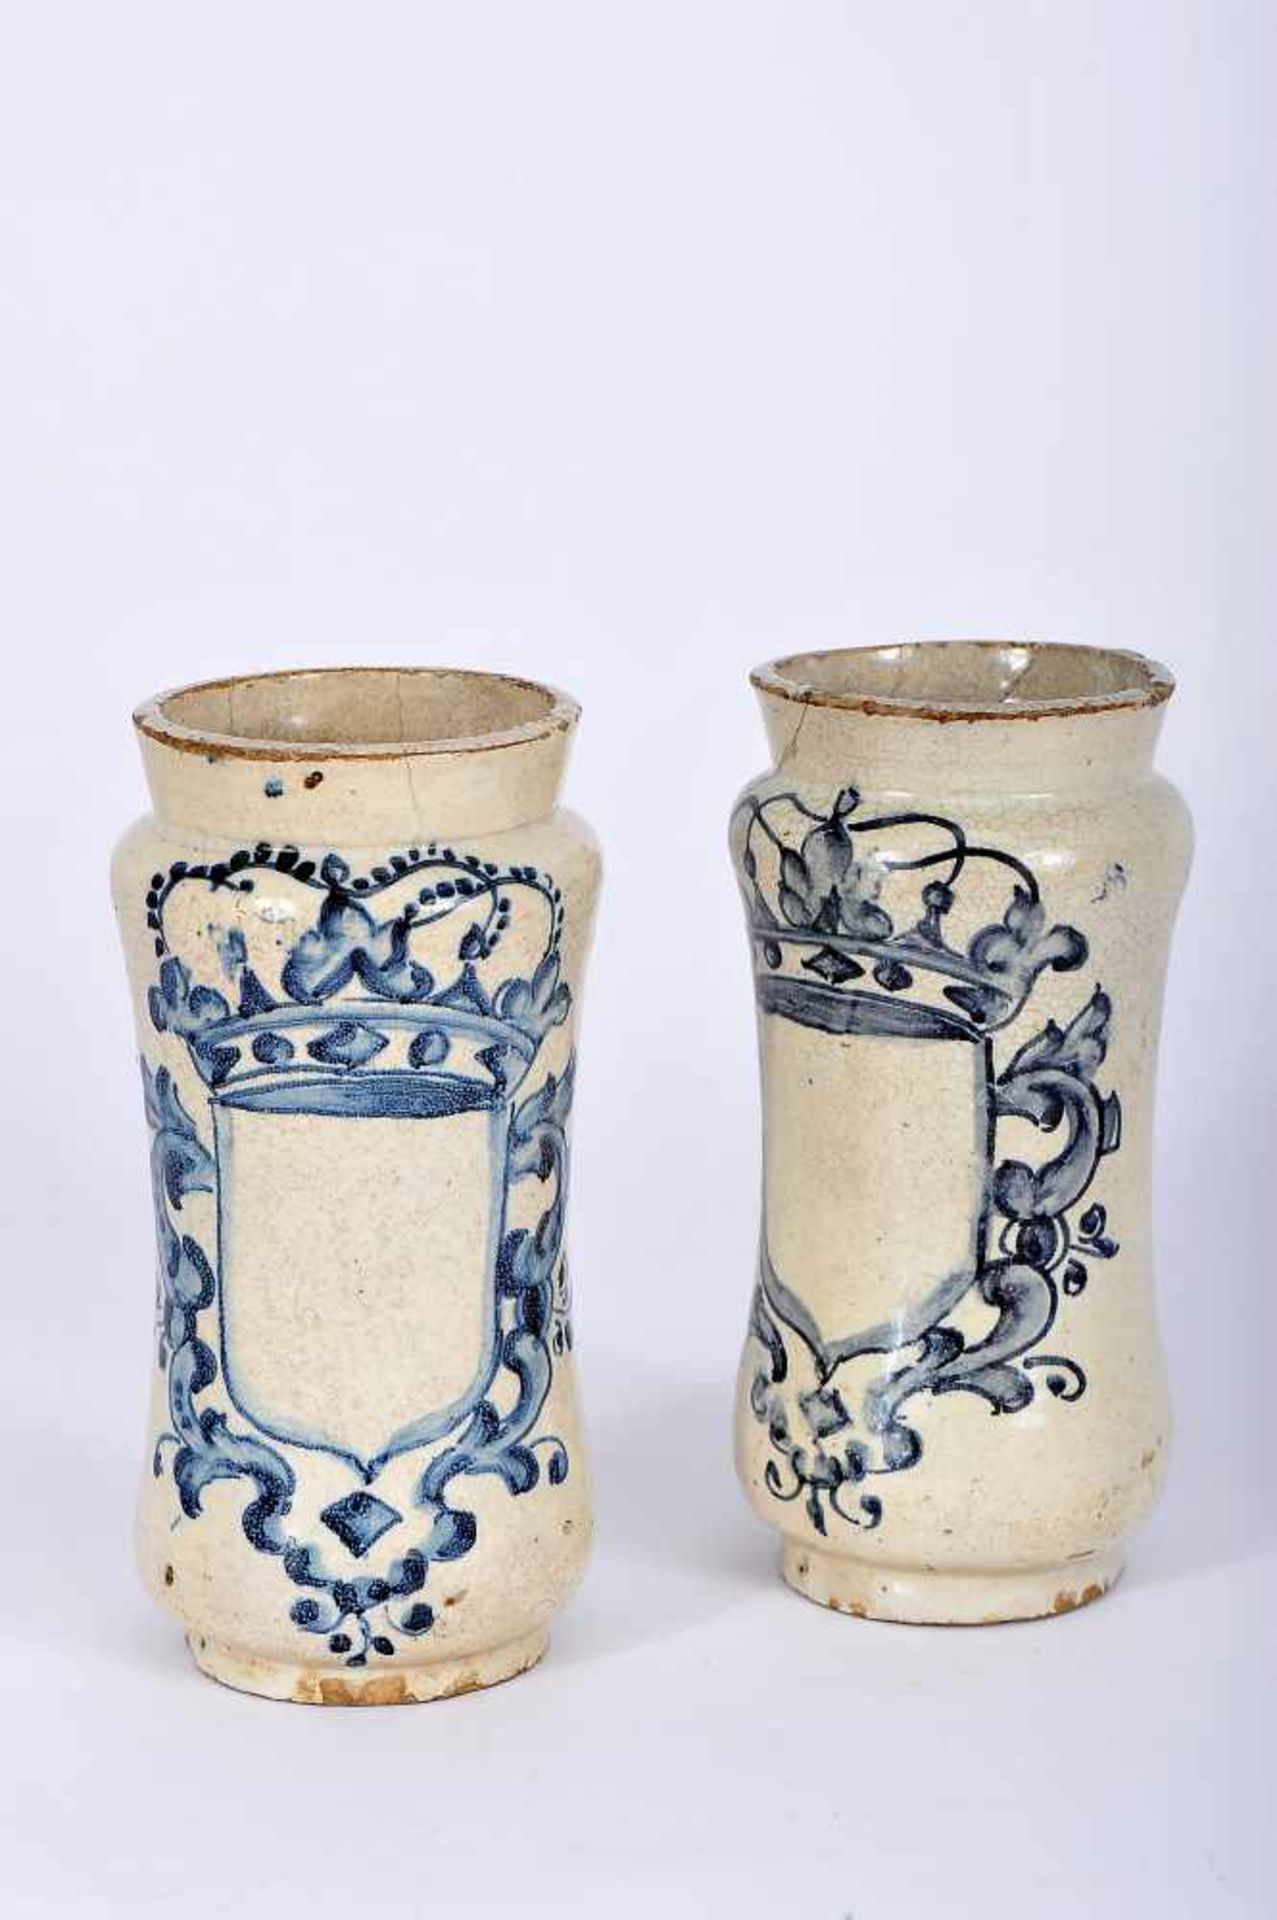 A Pair of Pharmacy Pots, faience, blue decoration "shields topped by royal crown", Portuguese,